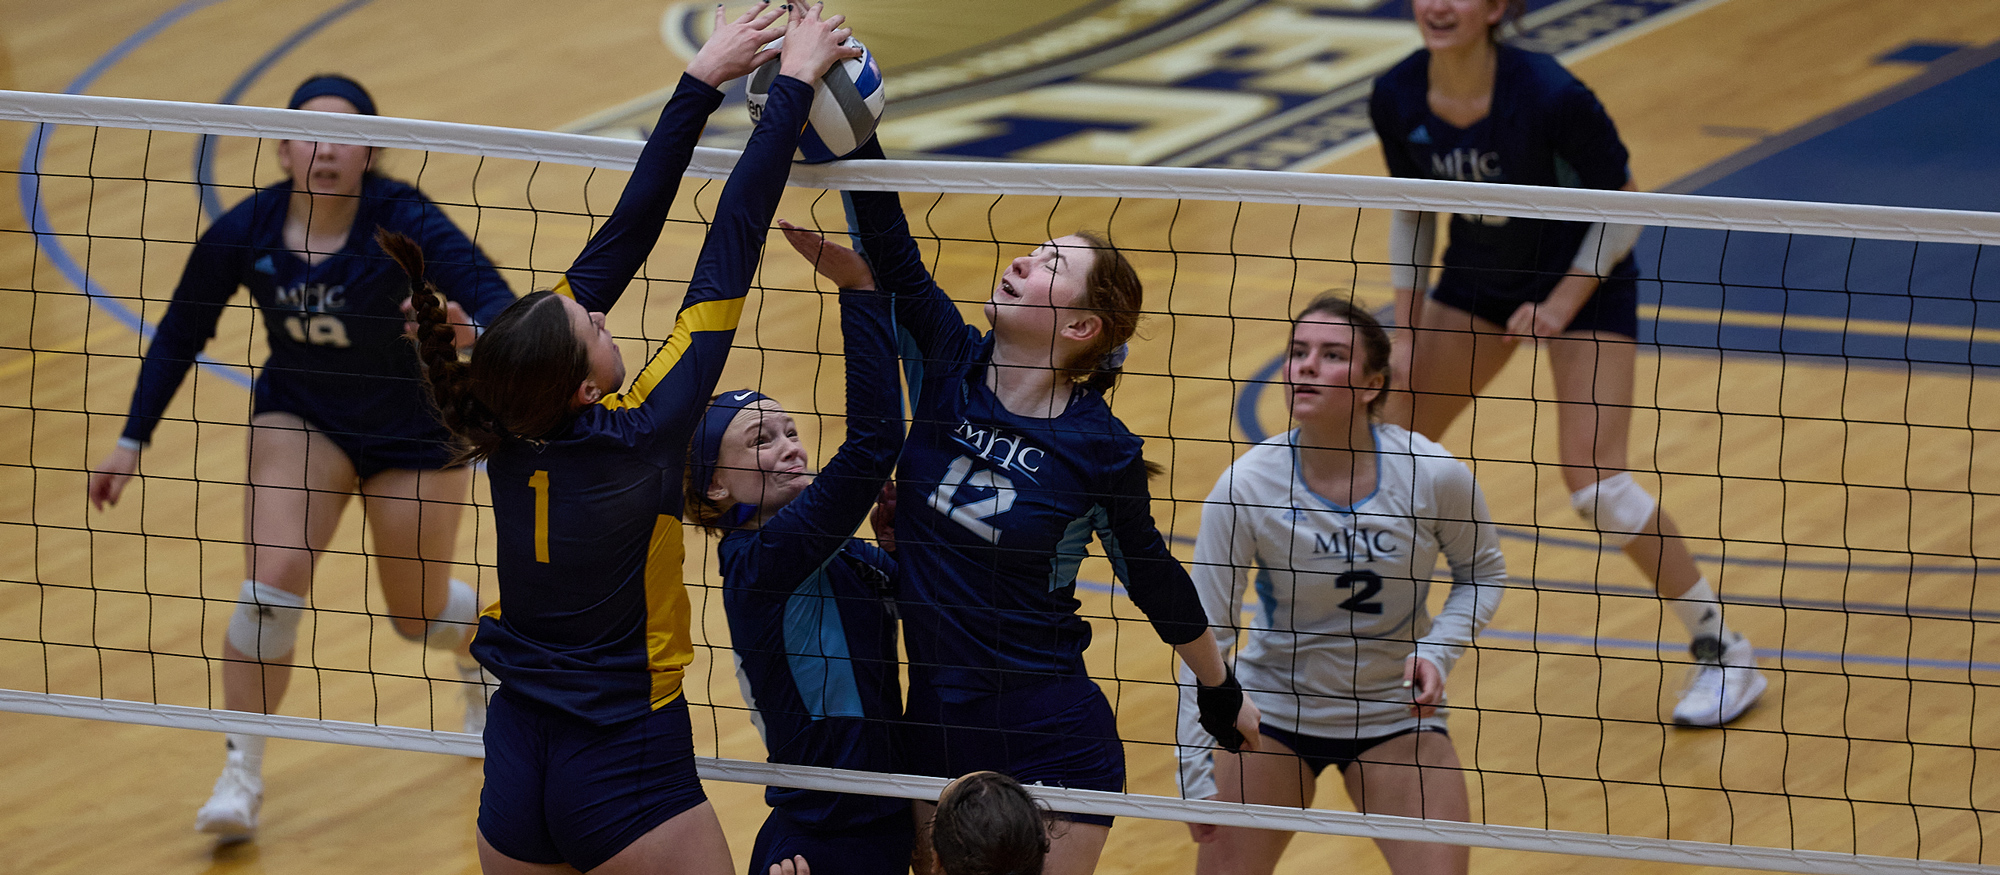 Katie Frank had 10 kills and three blocks in Mount Holyoke's 3-1 victory over Westfield State on Sept. 30, 2023 at MIT. (RJB Sports file photo)